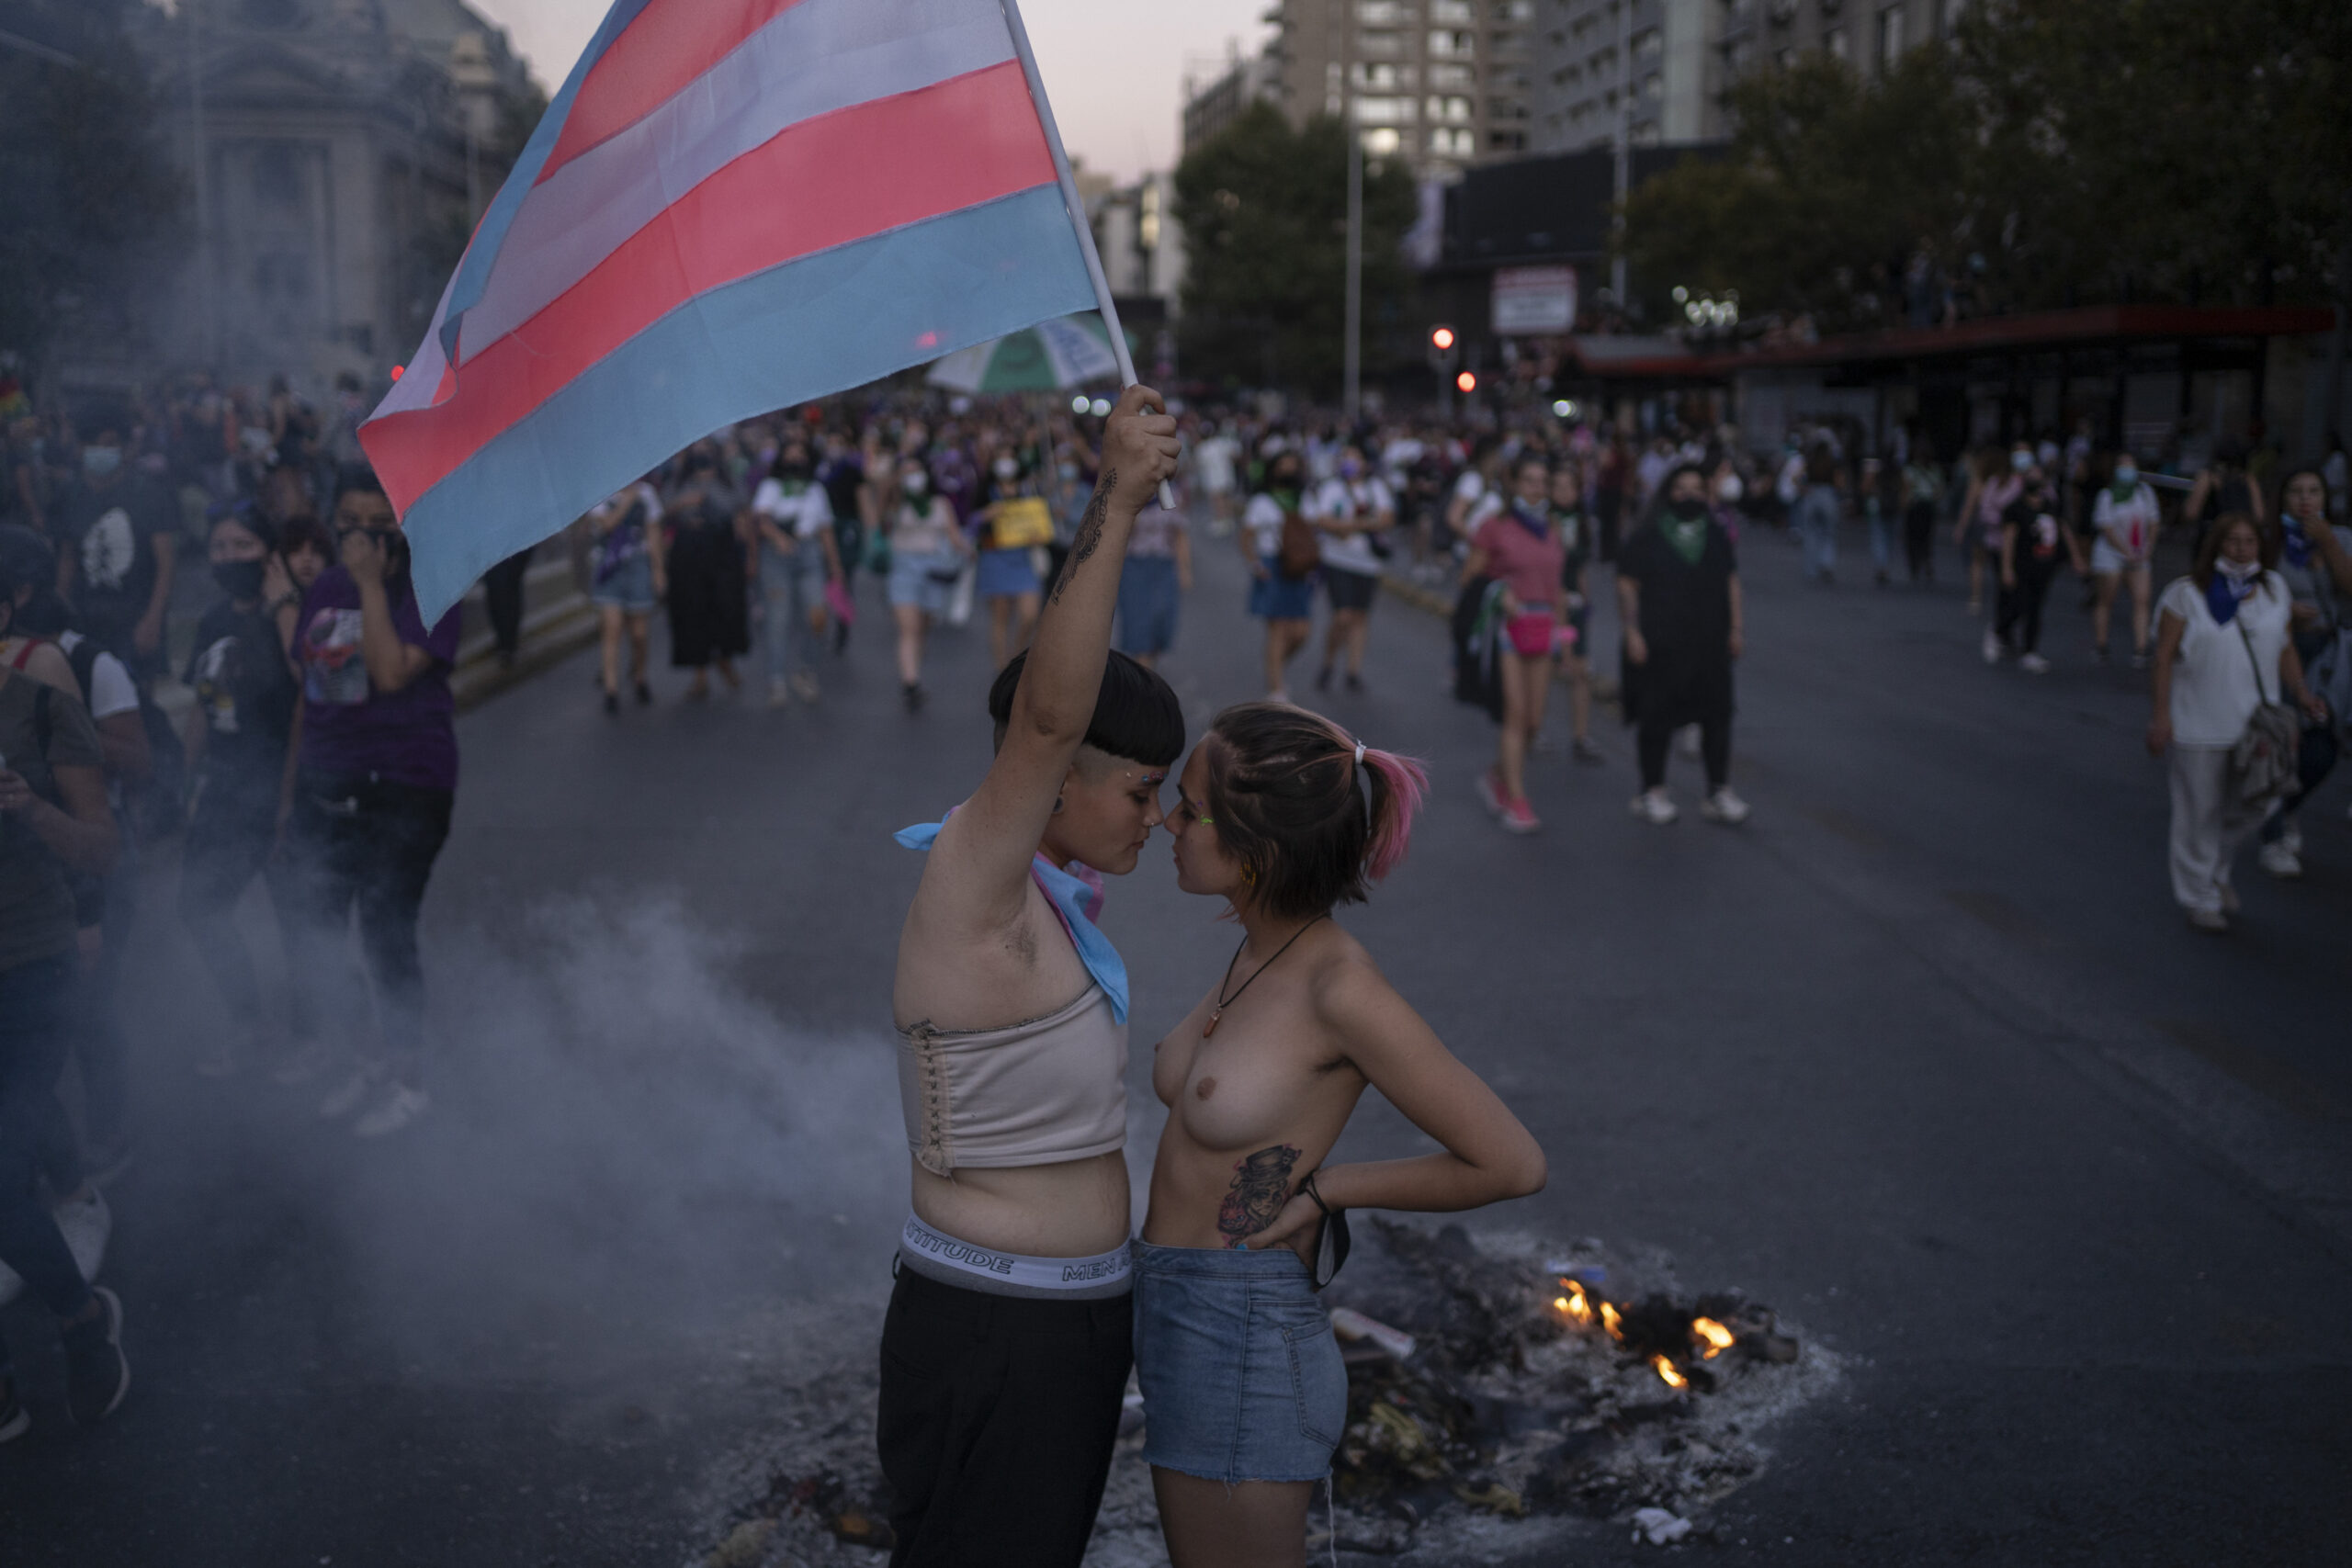 Two protestors pause during a march on the occasion of International Women's Day, in Santiago, Chile, March 8, 2022.